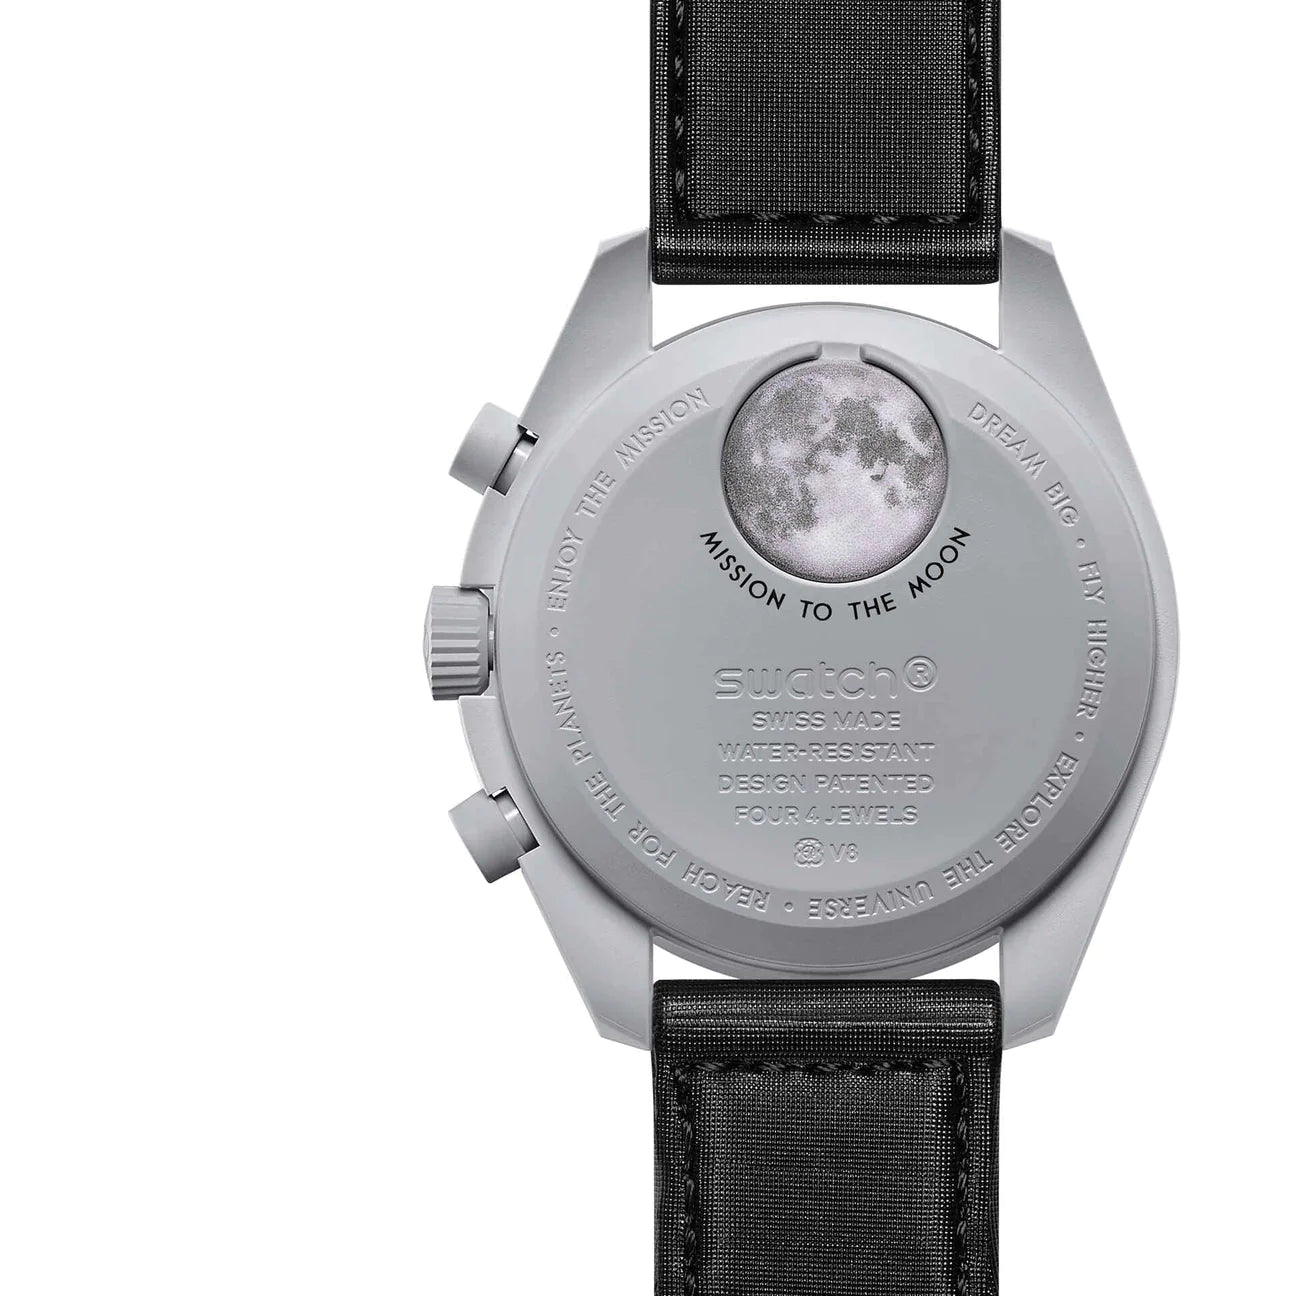 Swatch x Omega Bioceramic Moonswatch Mission to the Moon "SO33M100"